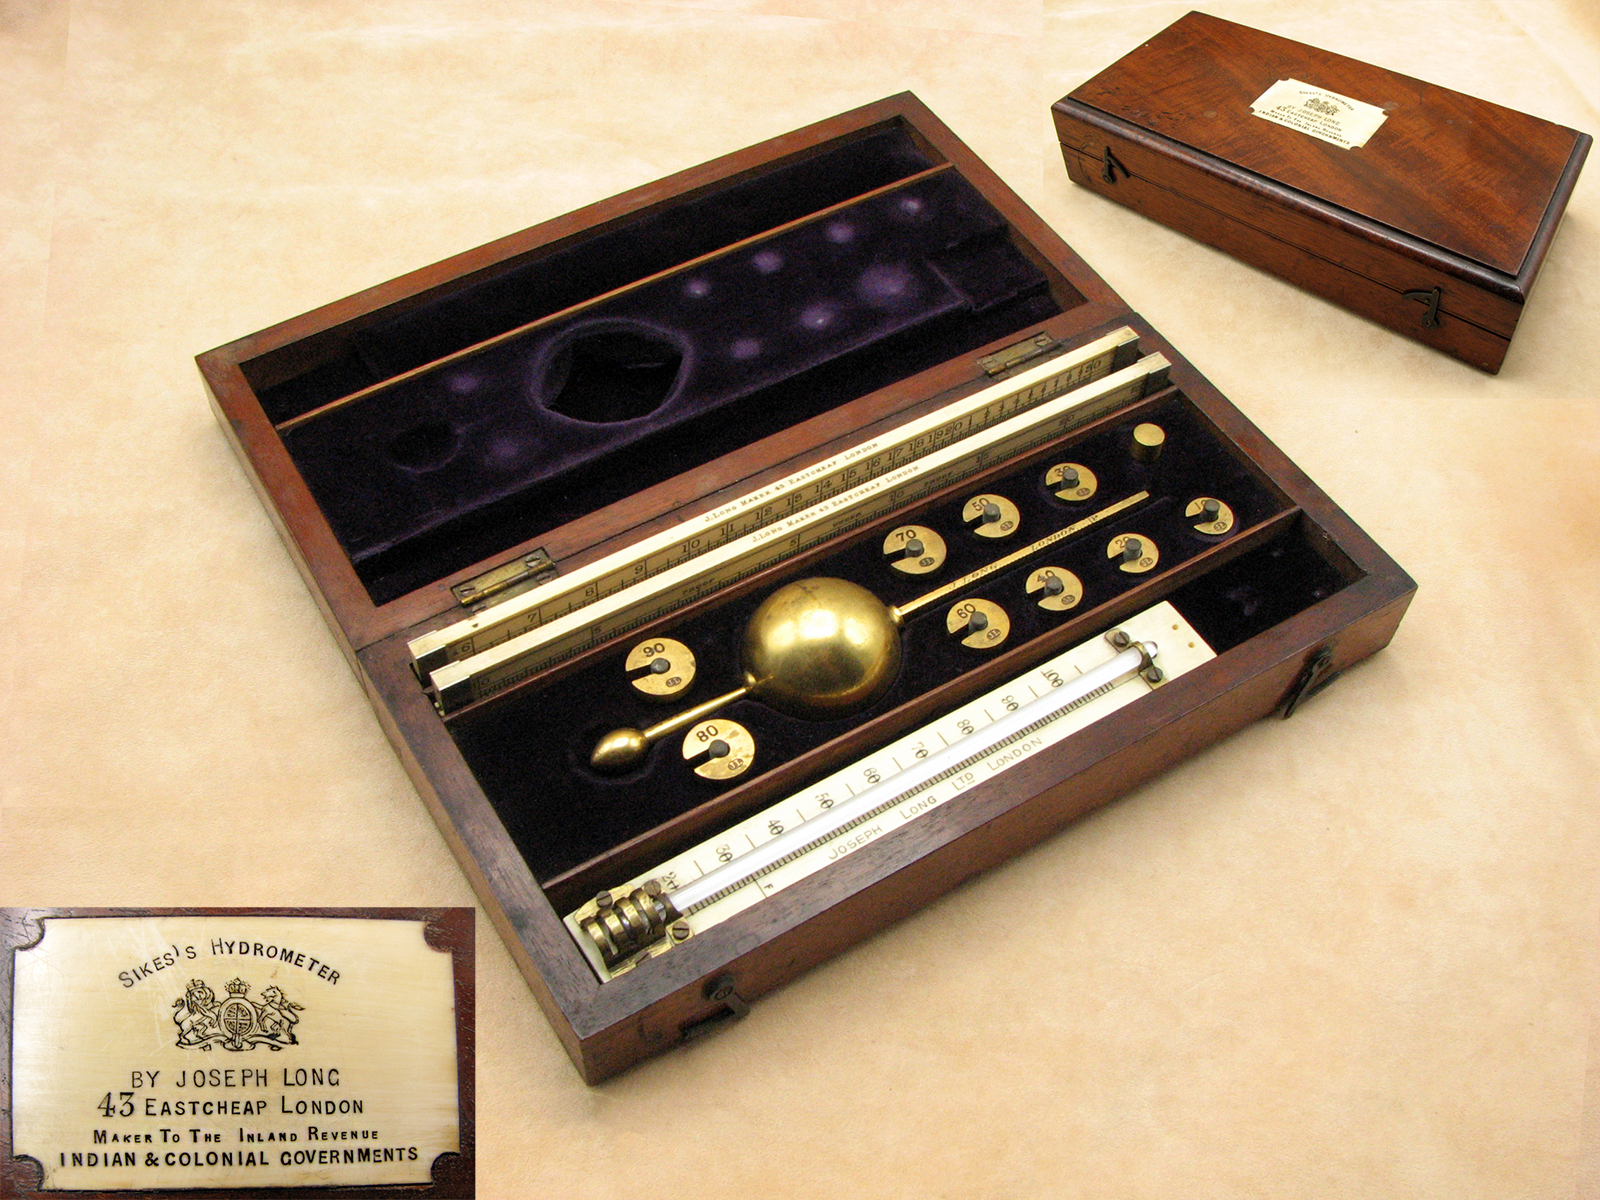 Exceptional 19th century Sikes Hydrometer set by Joseph Long, 43 Eastcheap